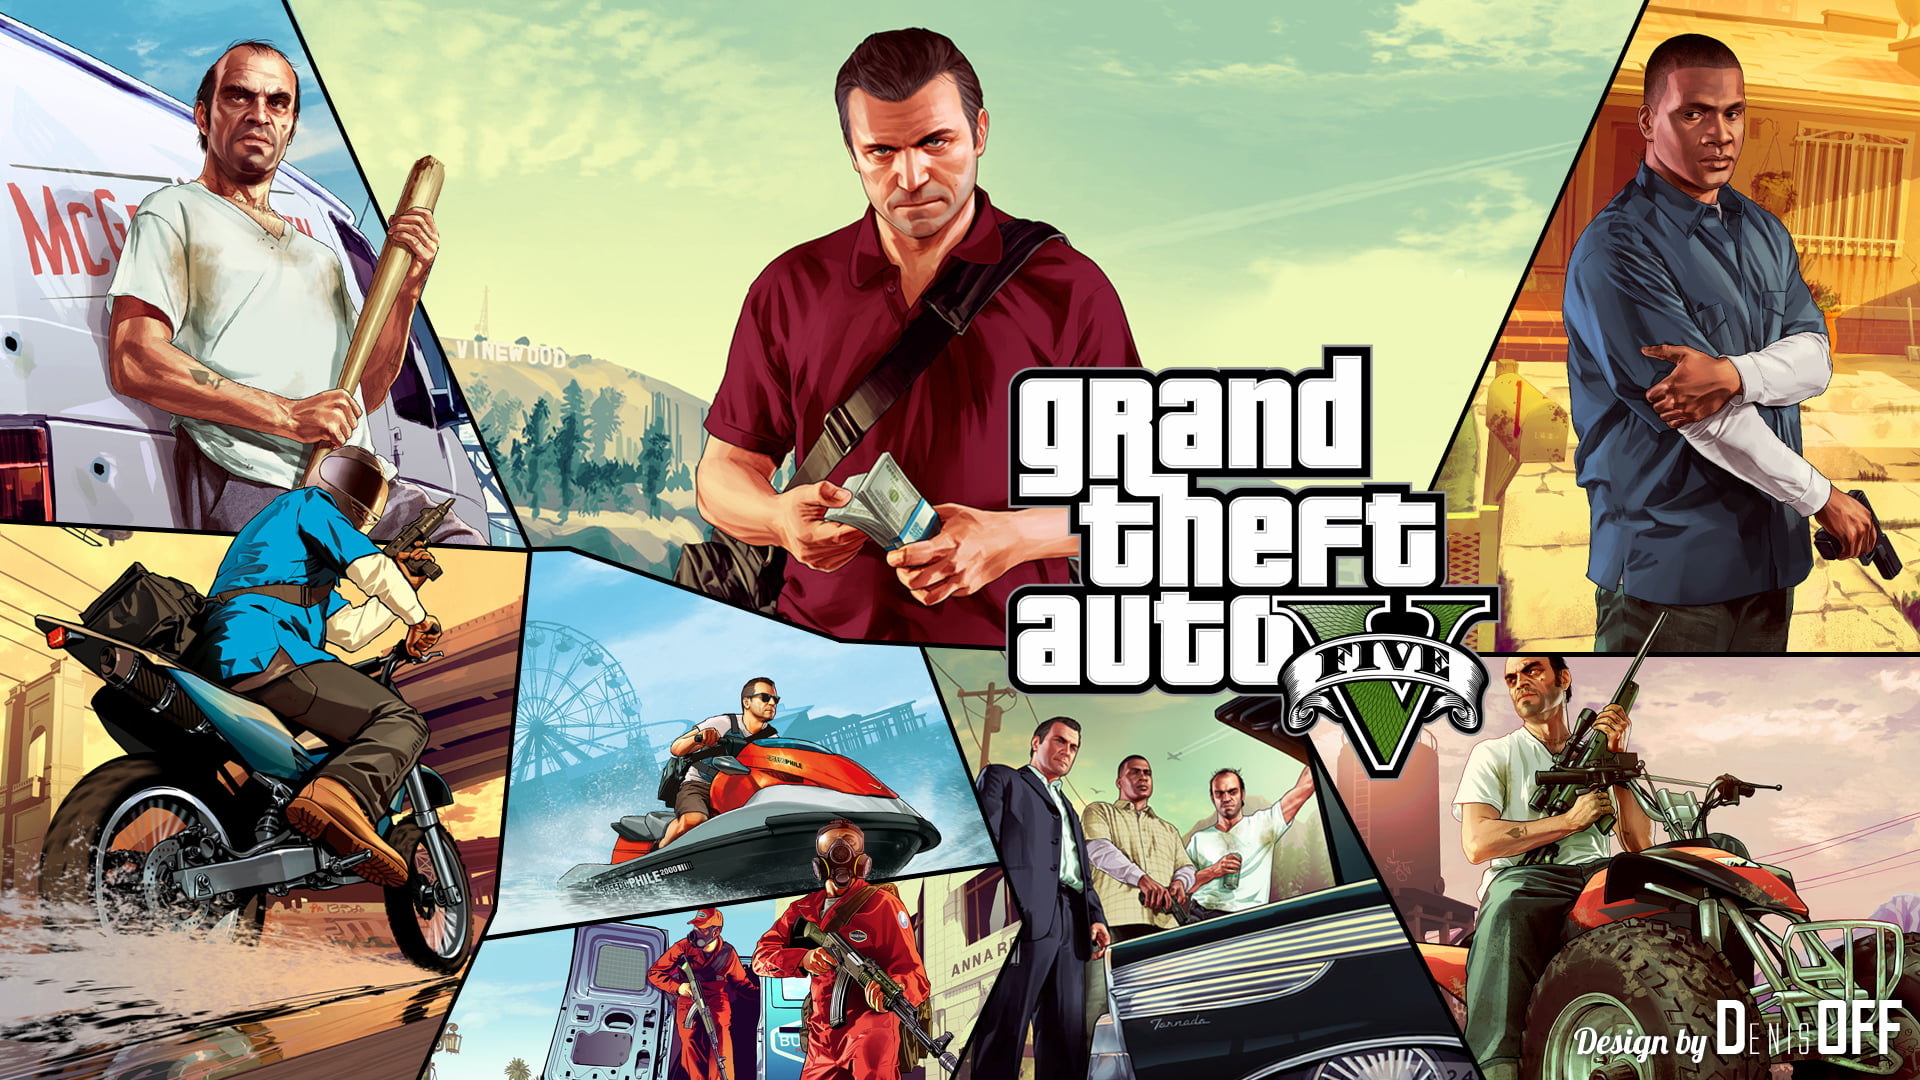 Grand Theft Auto Five game poster